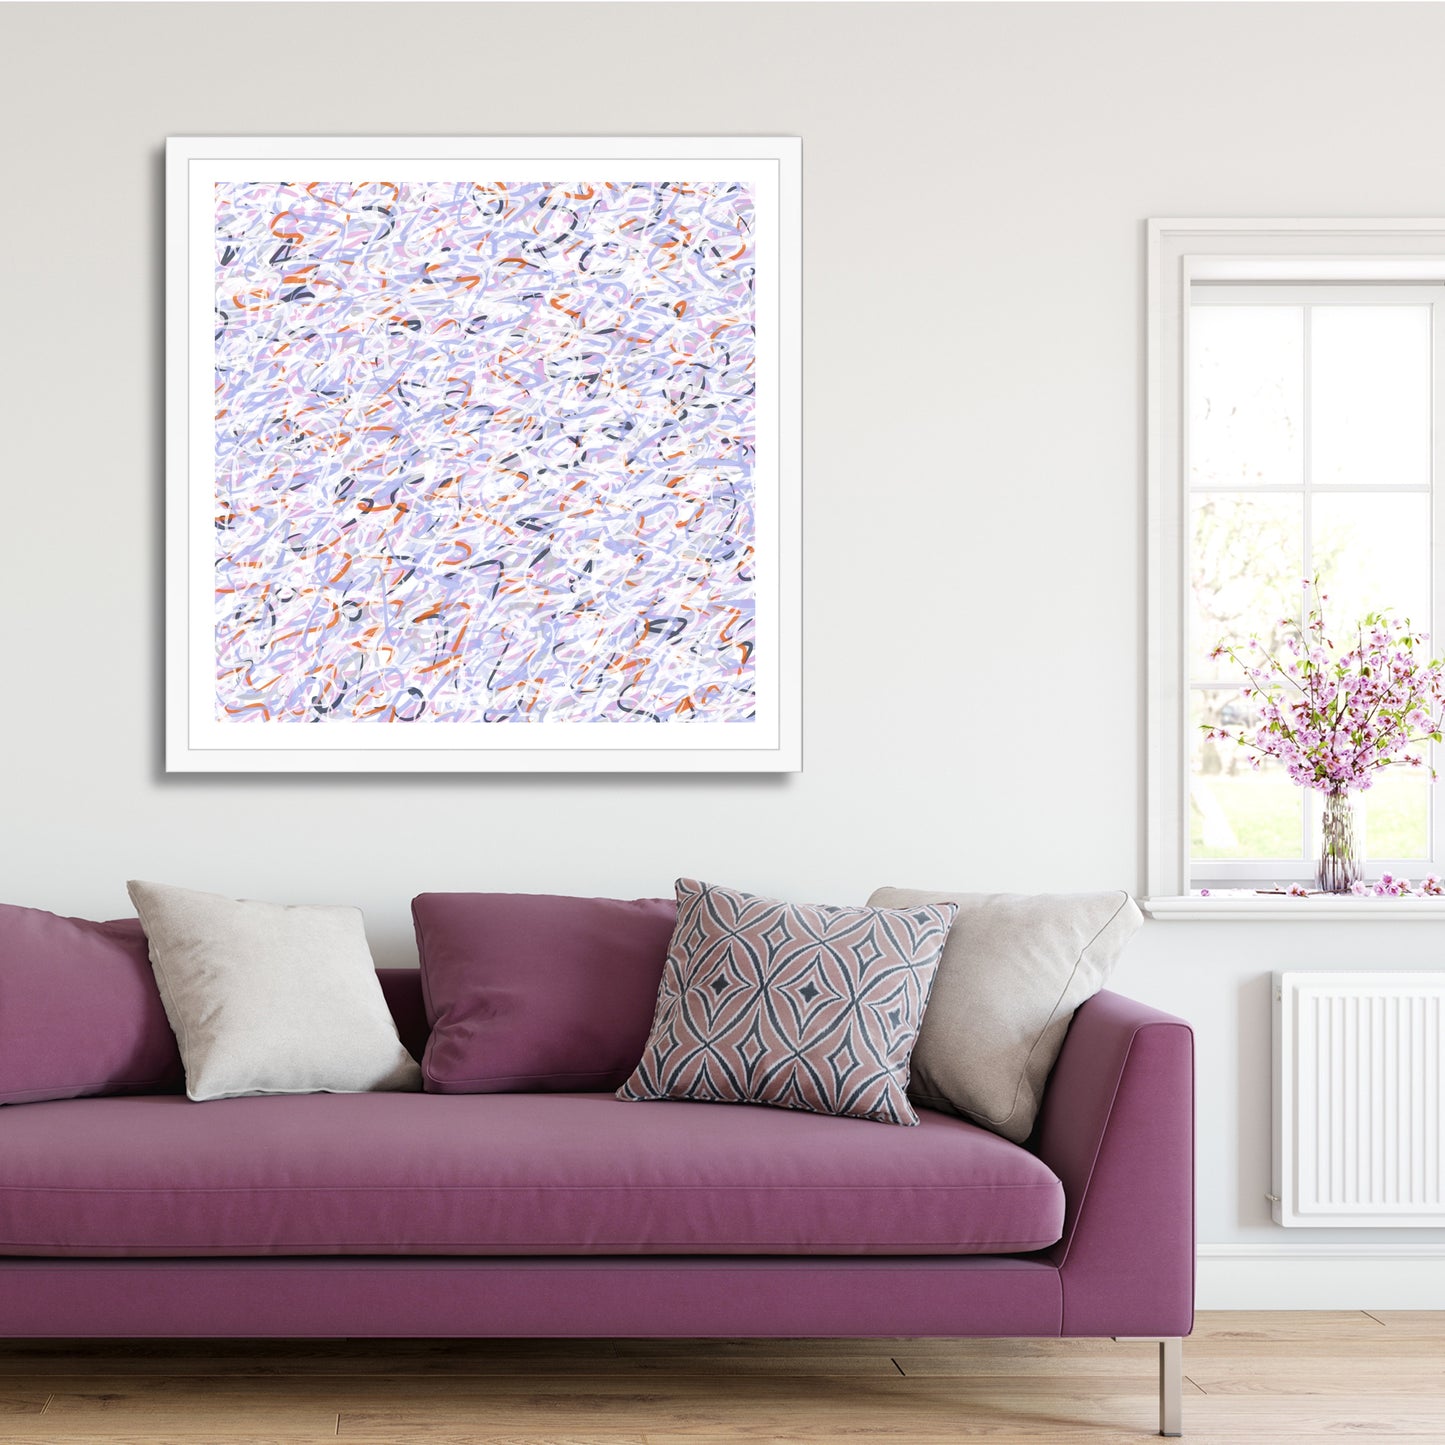 'Snowmelt' hangs on a white wall above a muted pink sofa with a white-framed window to one side and, on the window sill, a loosely arranged bunch of pink blossom that has dropped petals onto the sill.